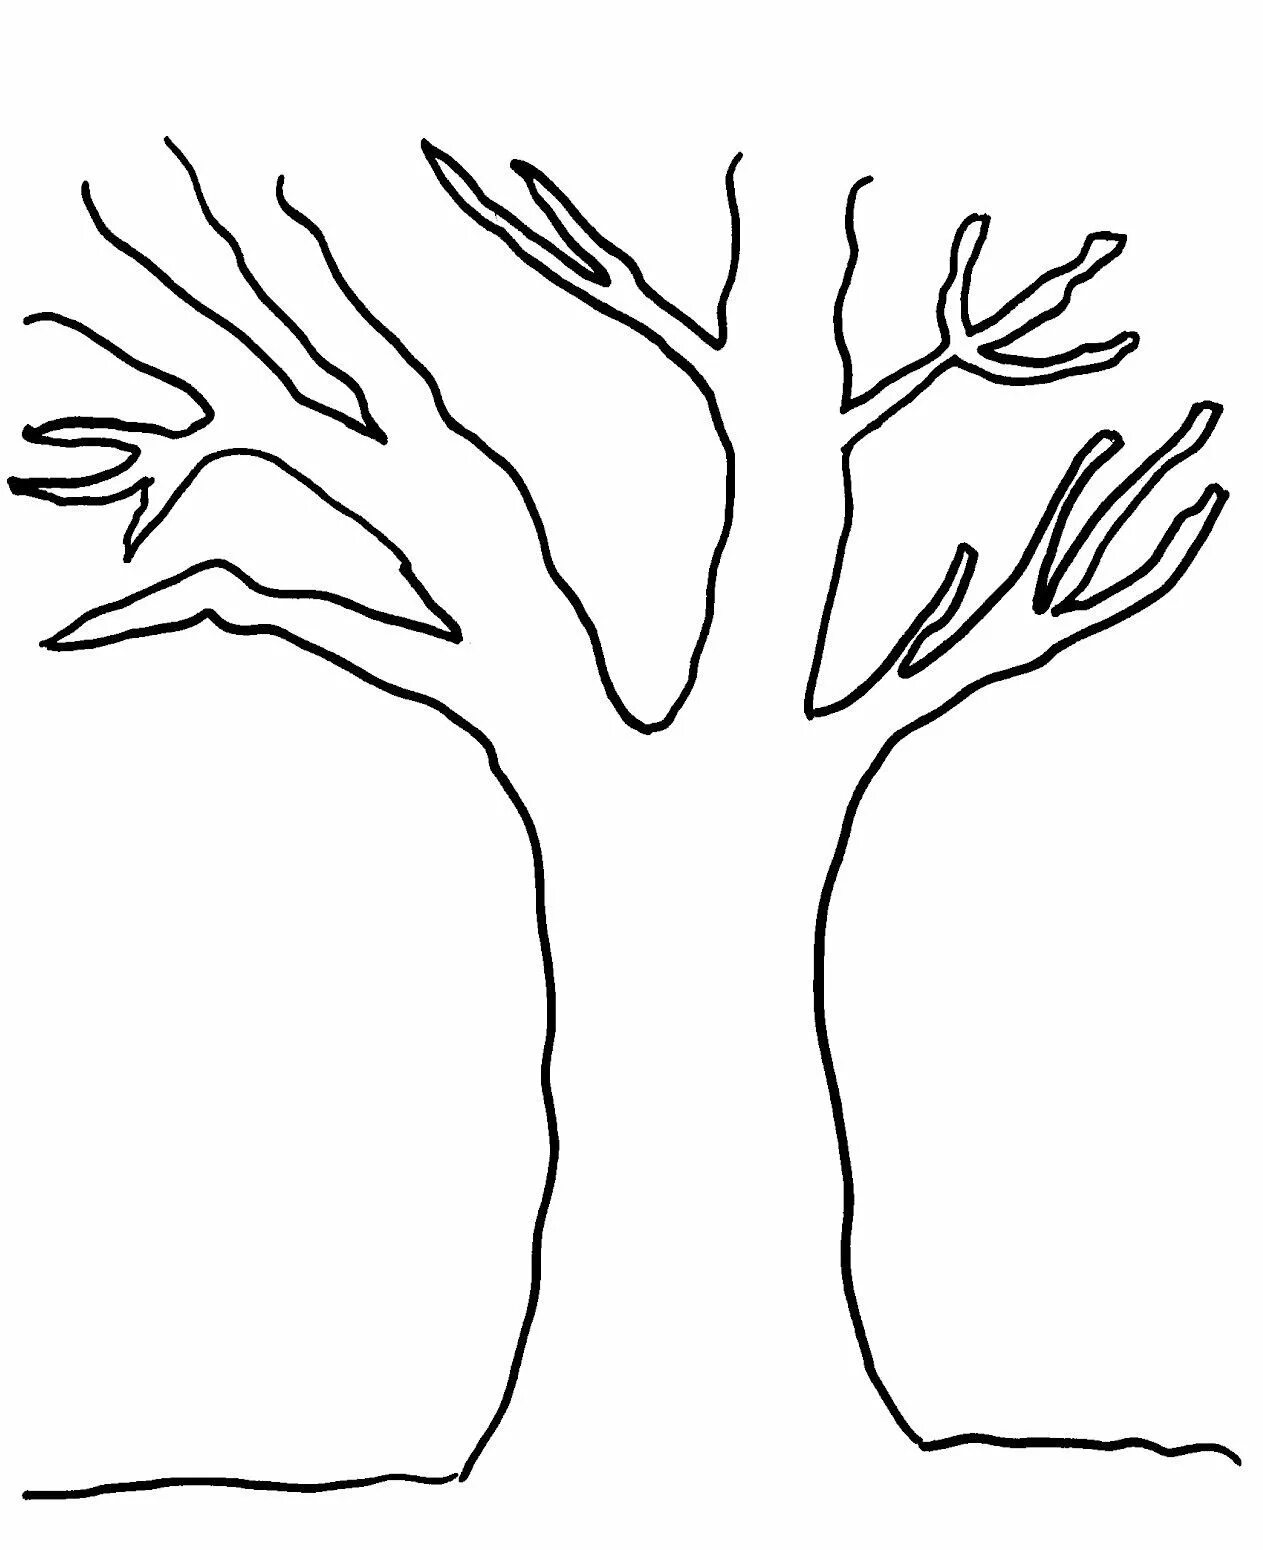 Tree without leaves outline #12